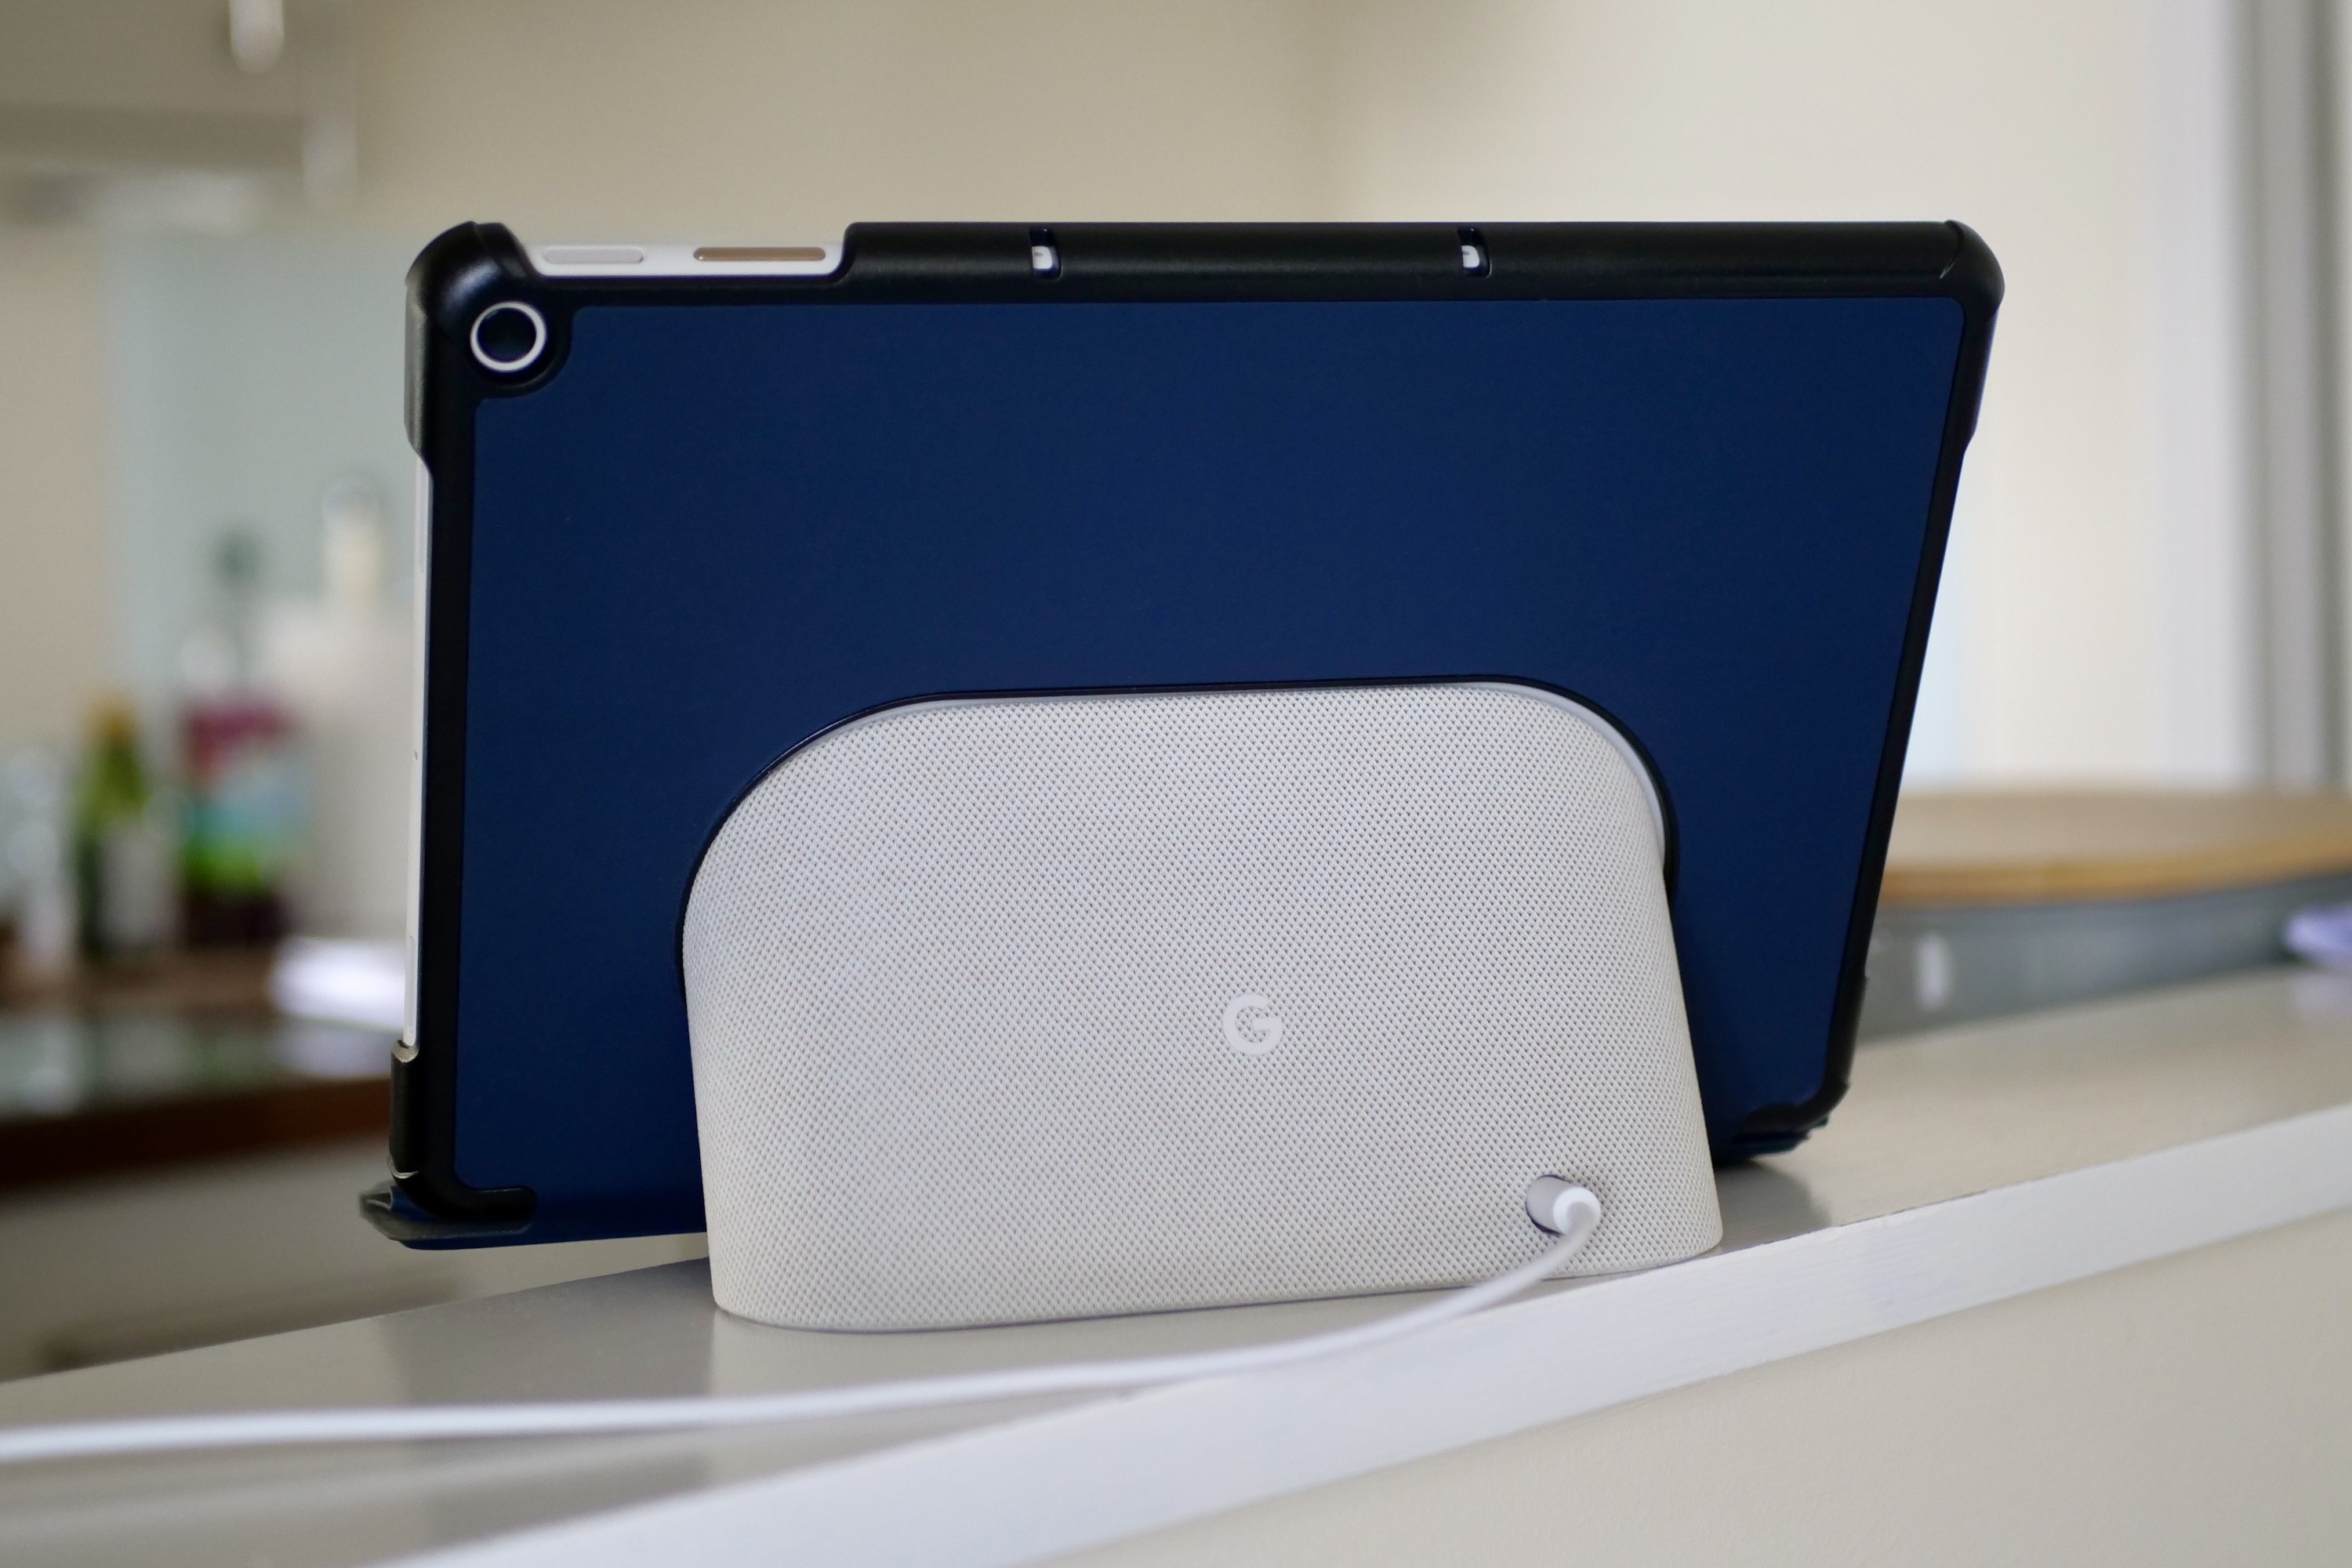 The back of the Pixel Tablet on its dock, with a case fitted.